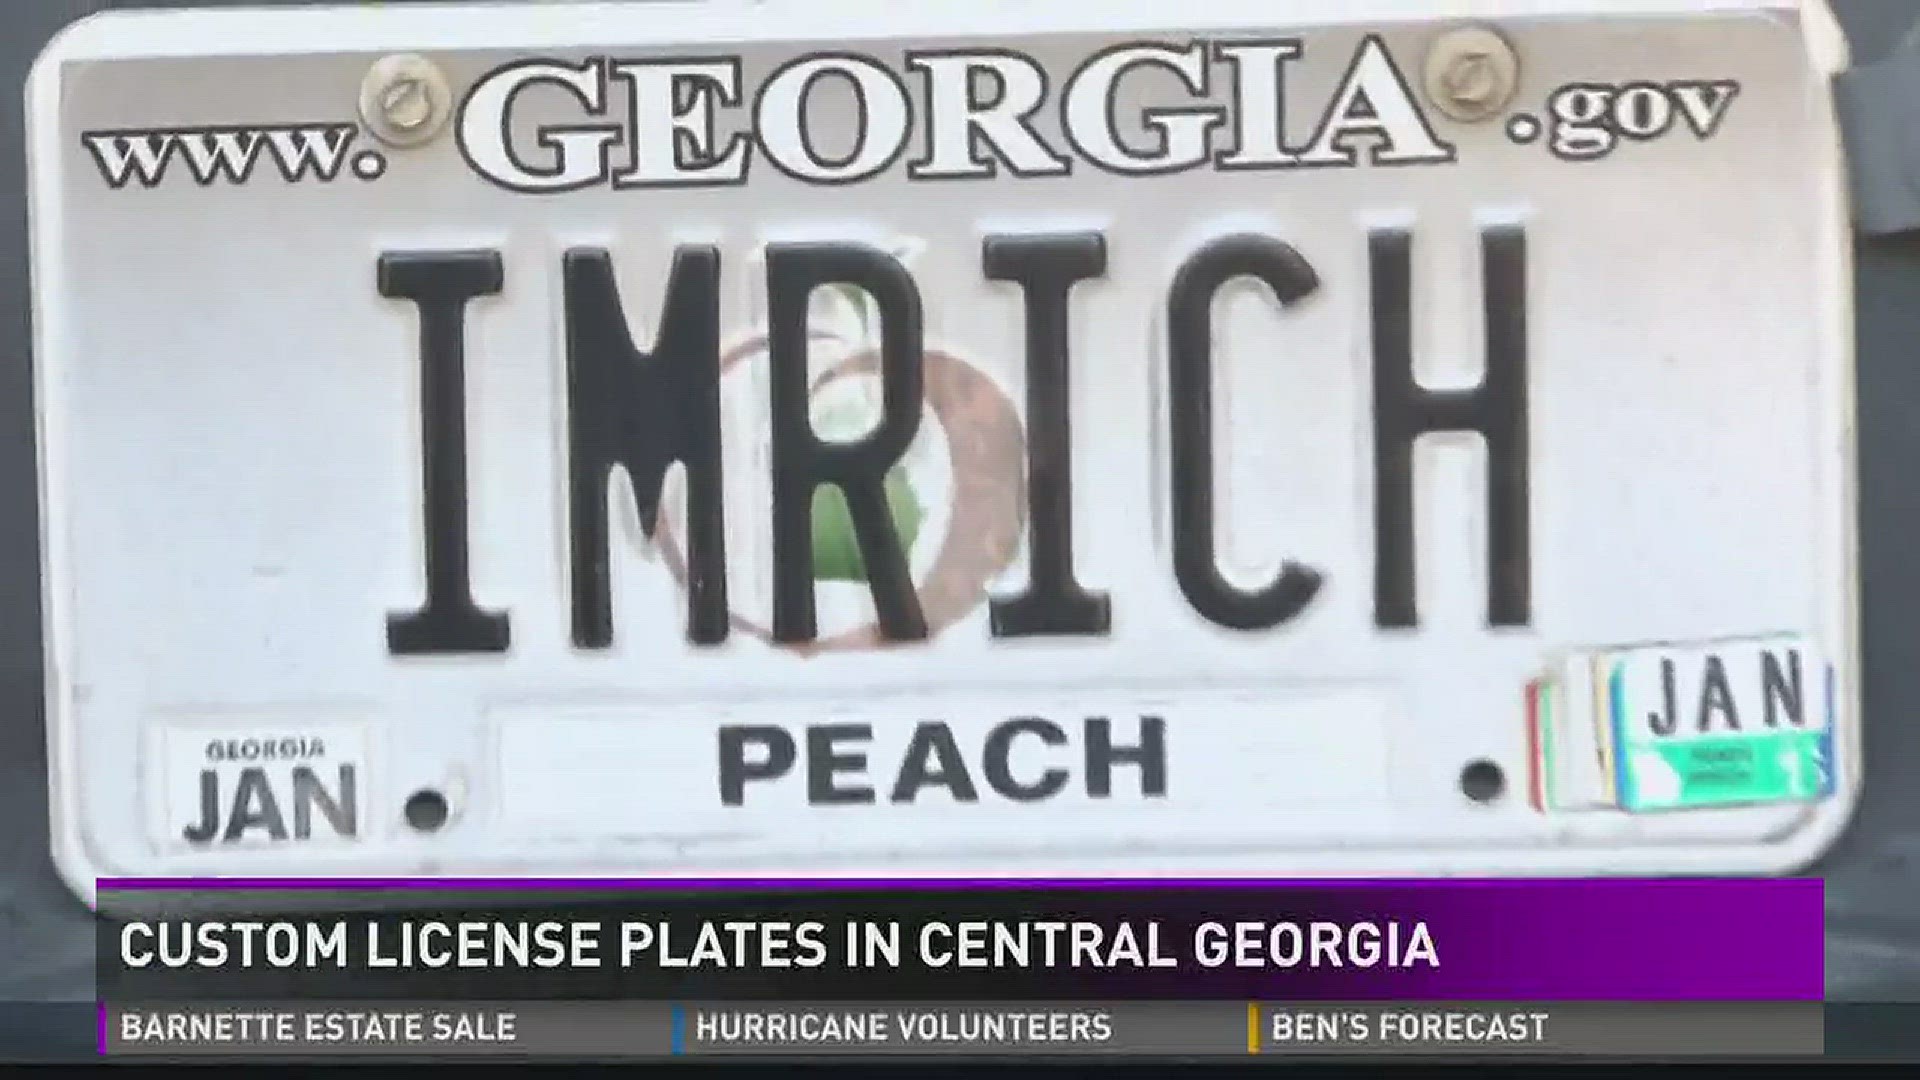 Behind the Plate: Vanity license in Central Georgia |